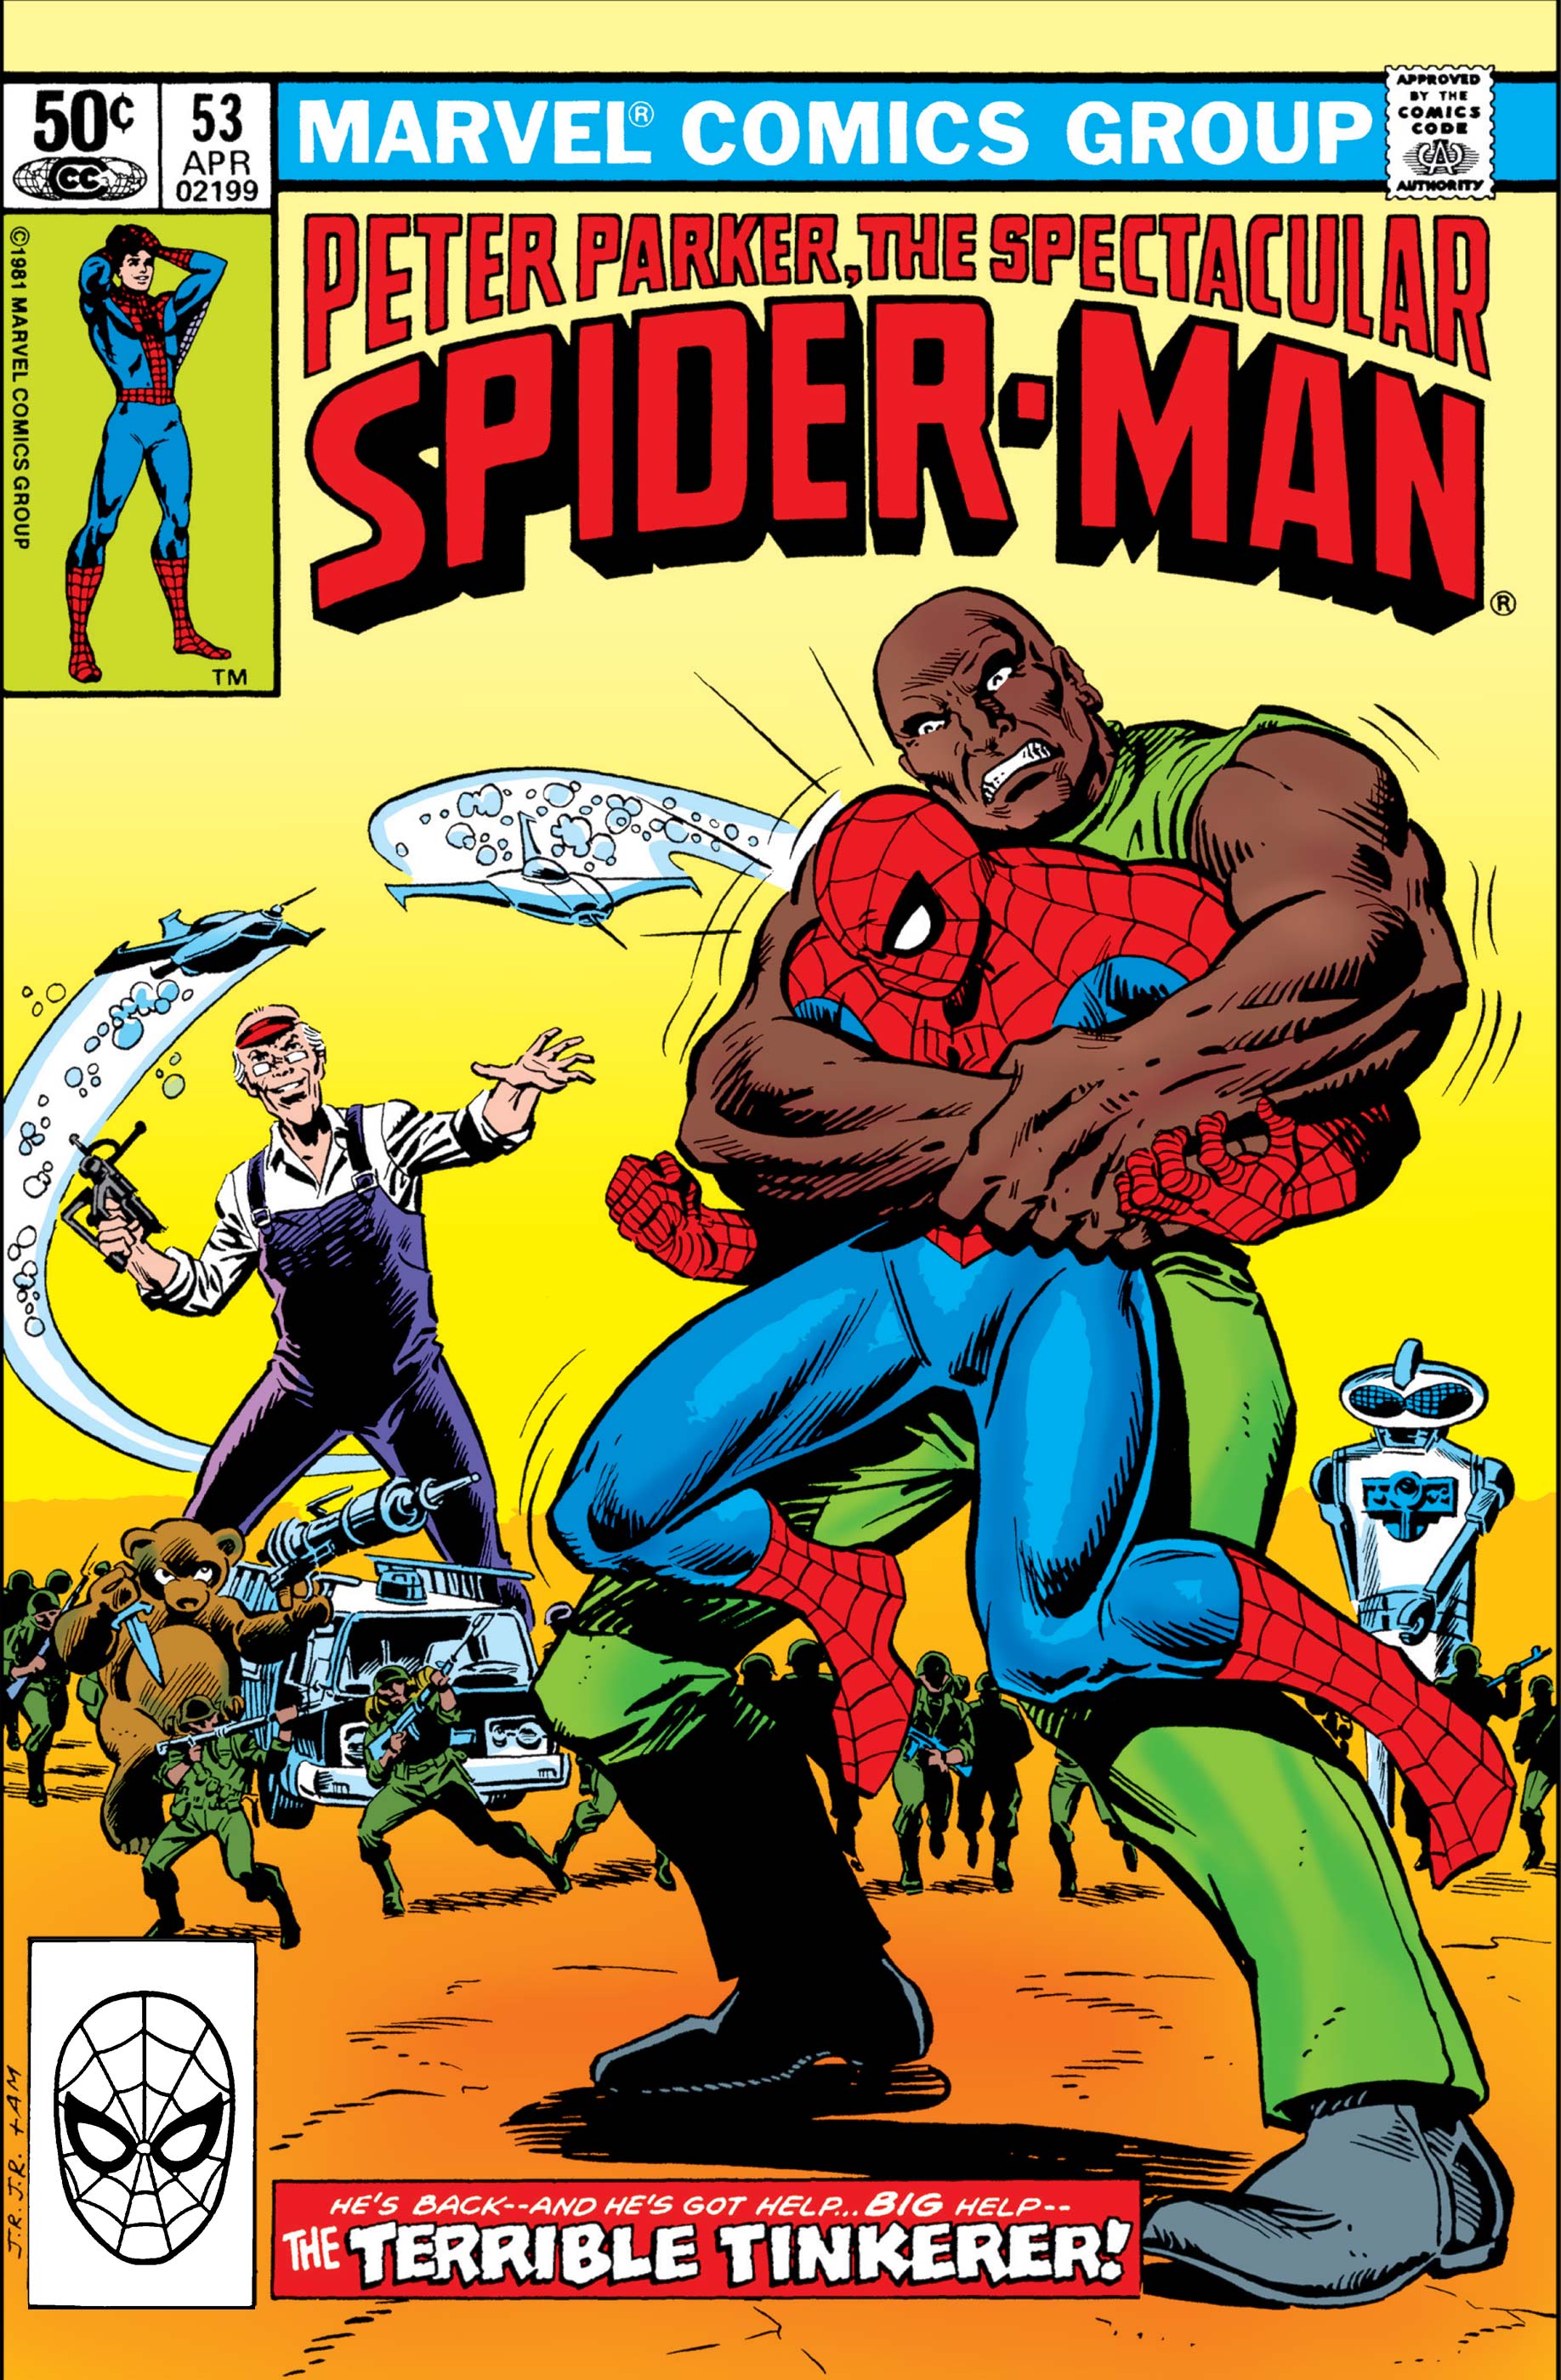 Peter Parker, the Spectacular Spider-Man (1976) #53 | Comic Issues | Marvel